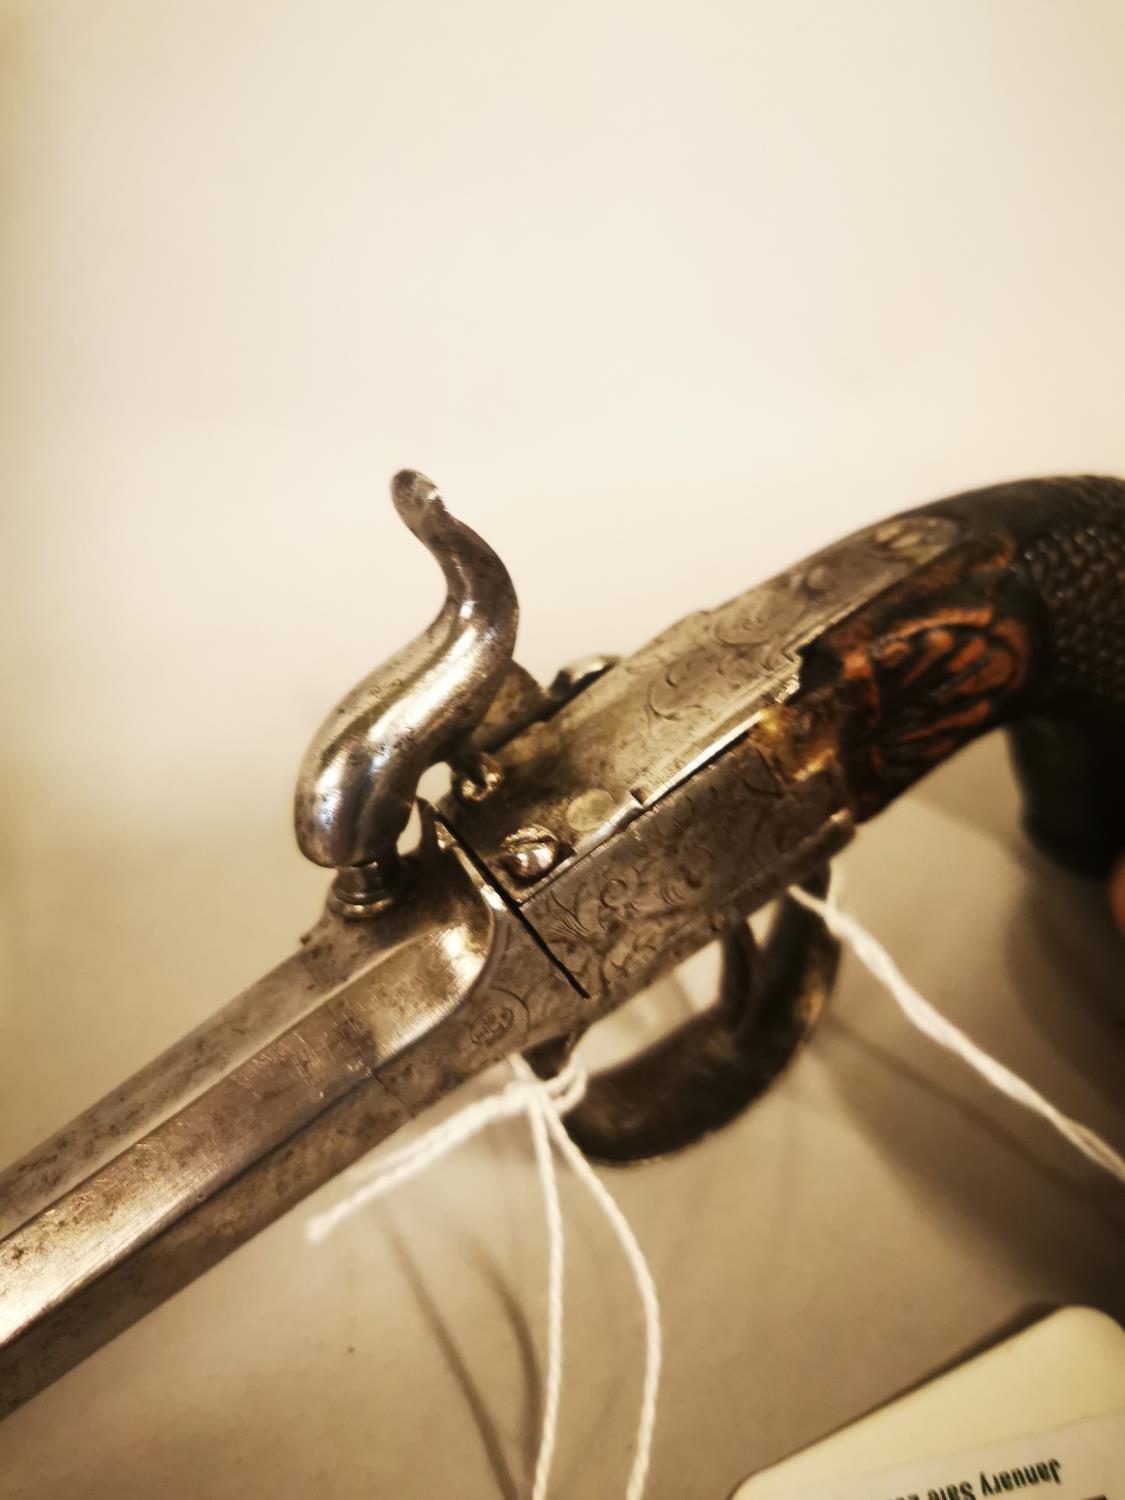 19th C. percussion capped pistol - Image 2 of 3